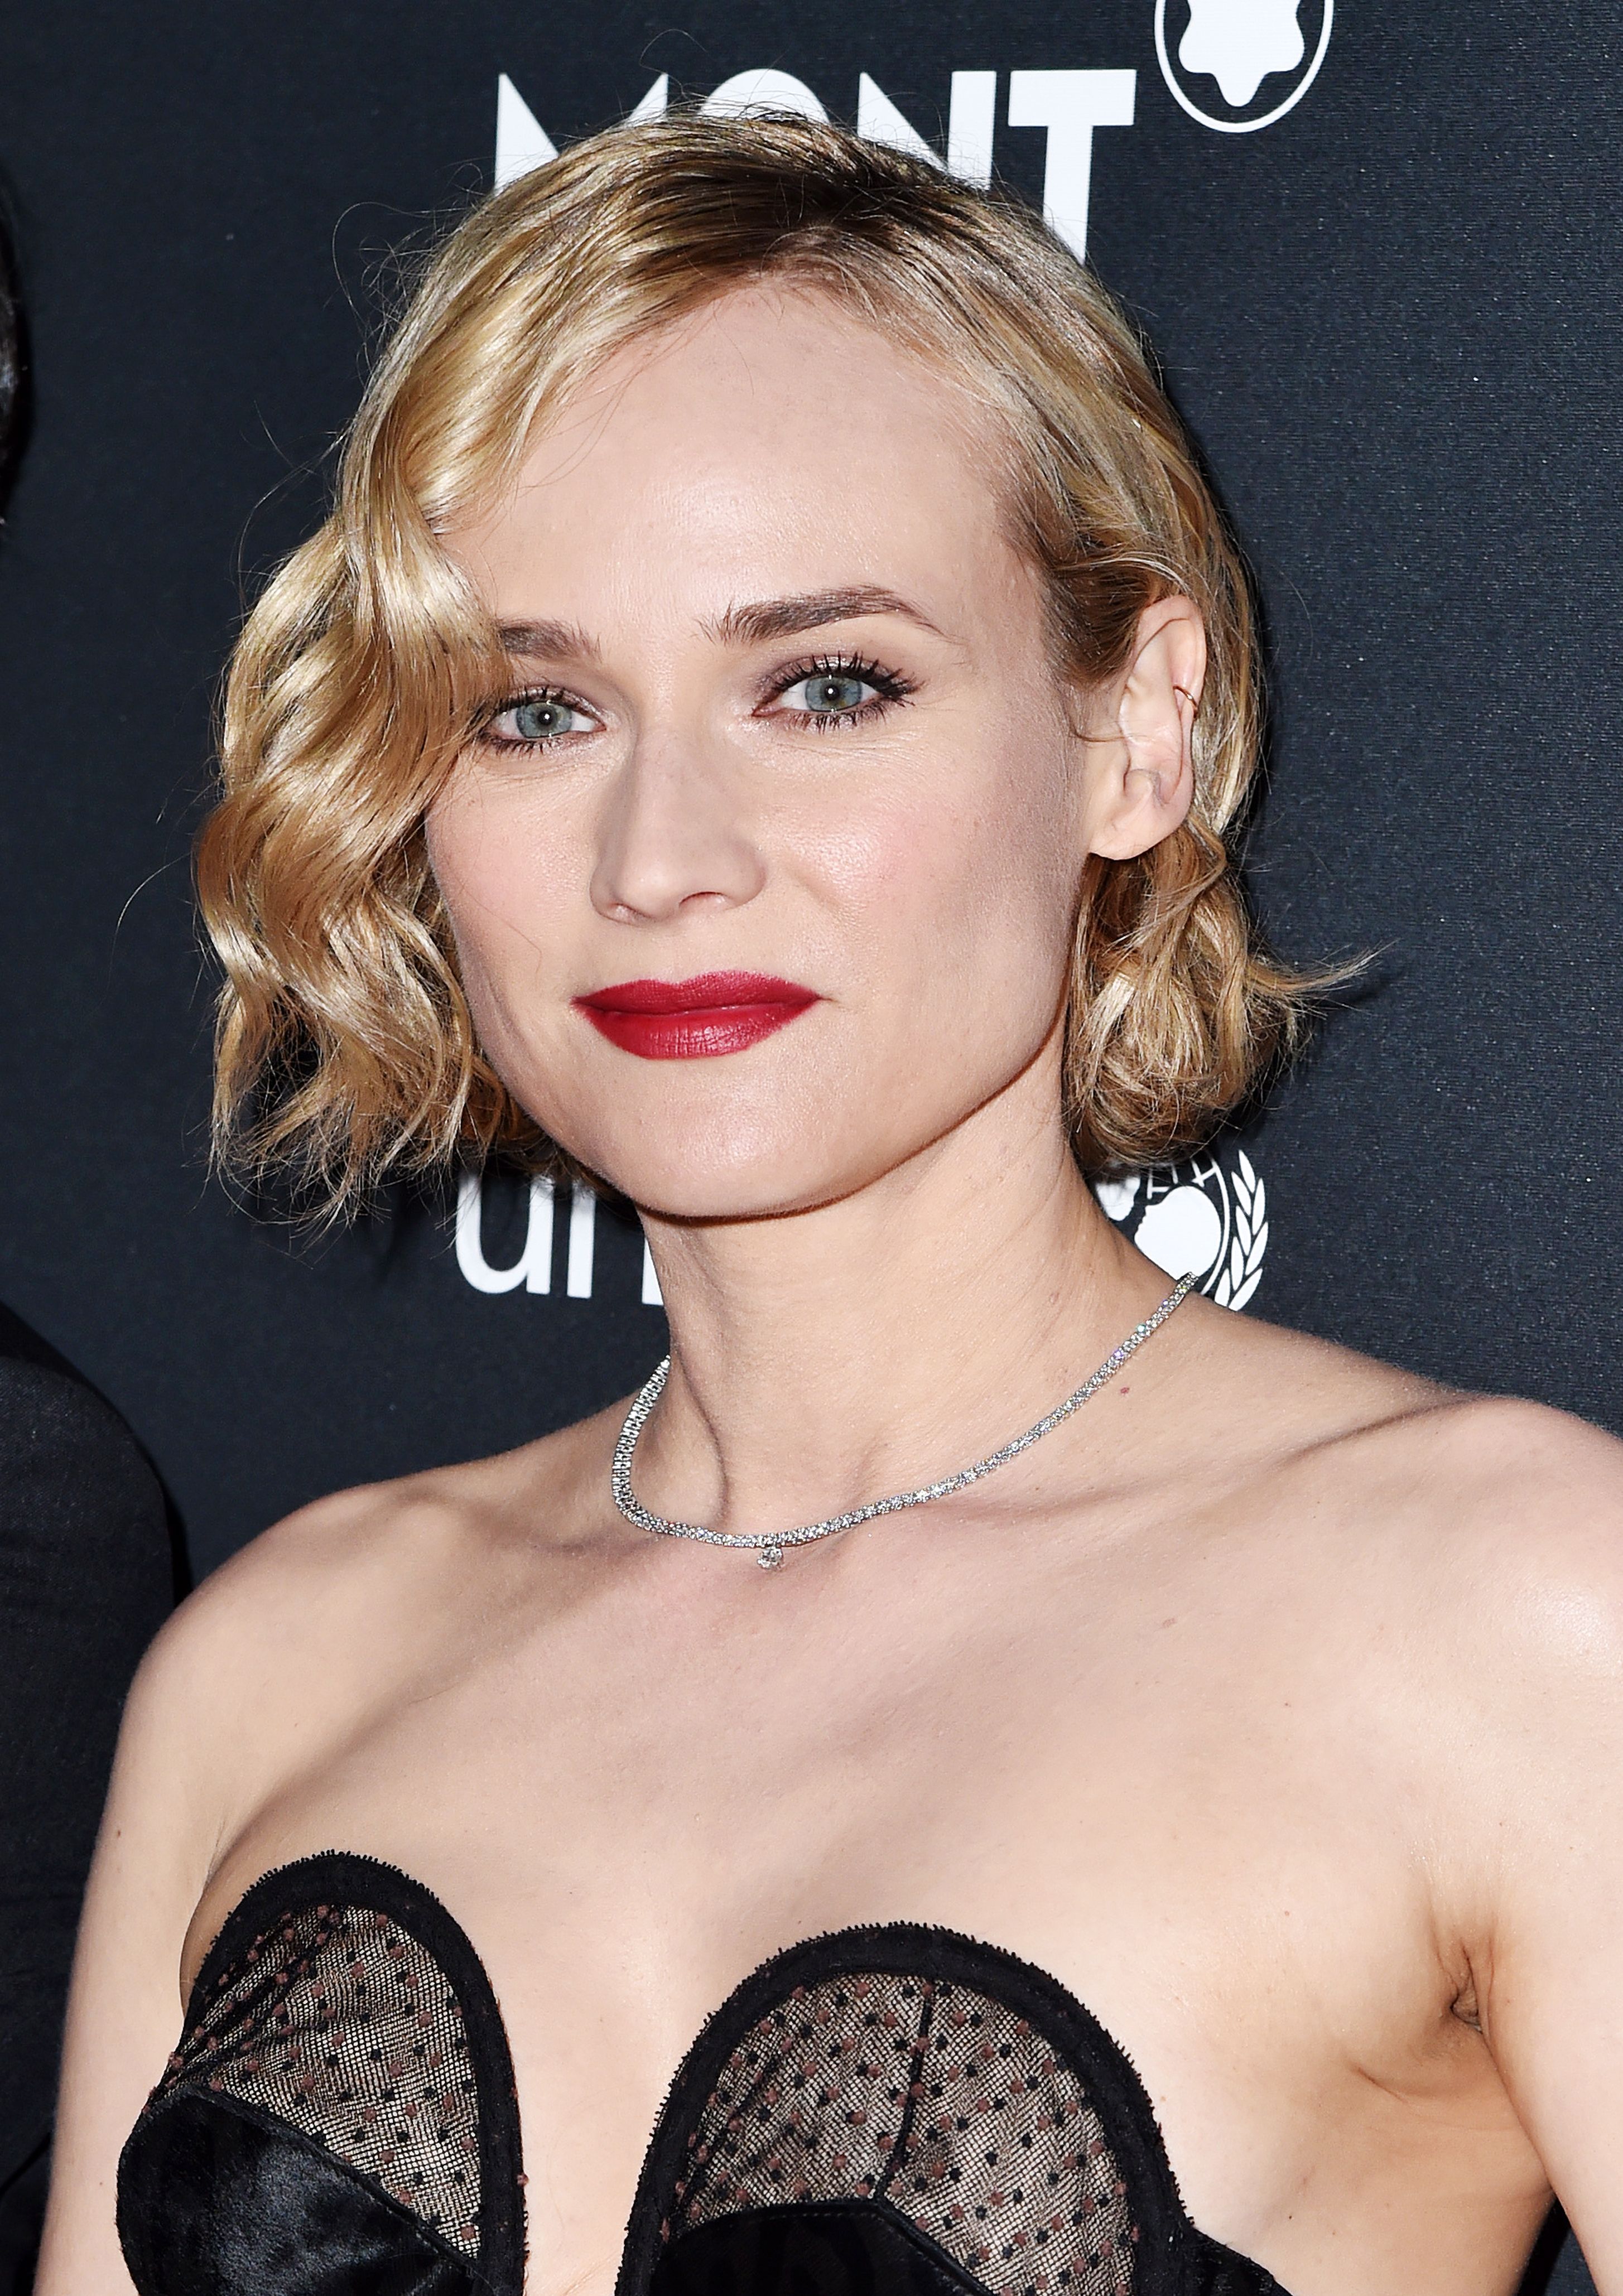 25 best short hair styles - bobs, pixie cuts, and more